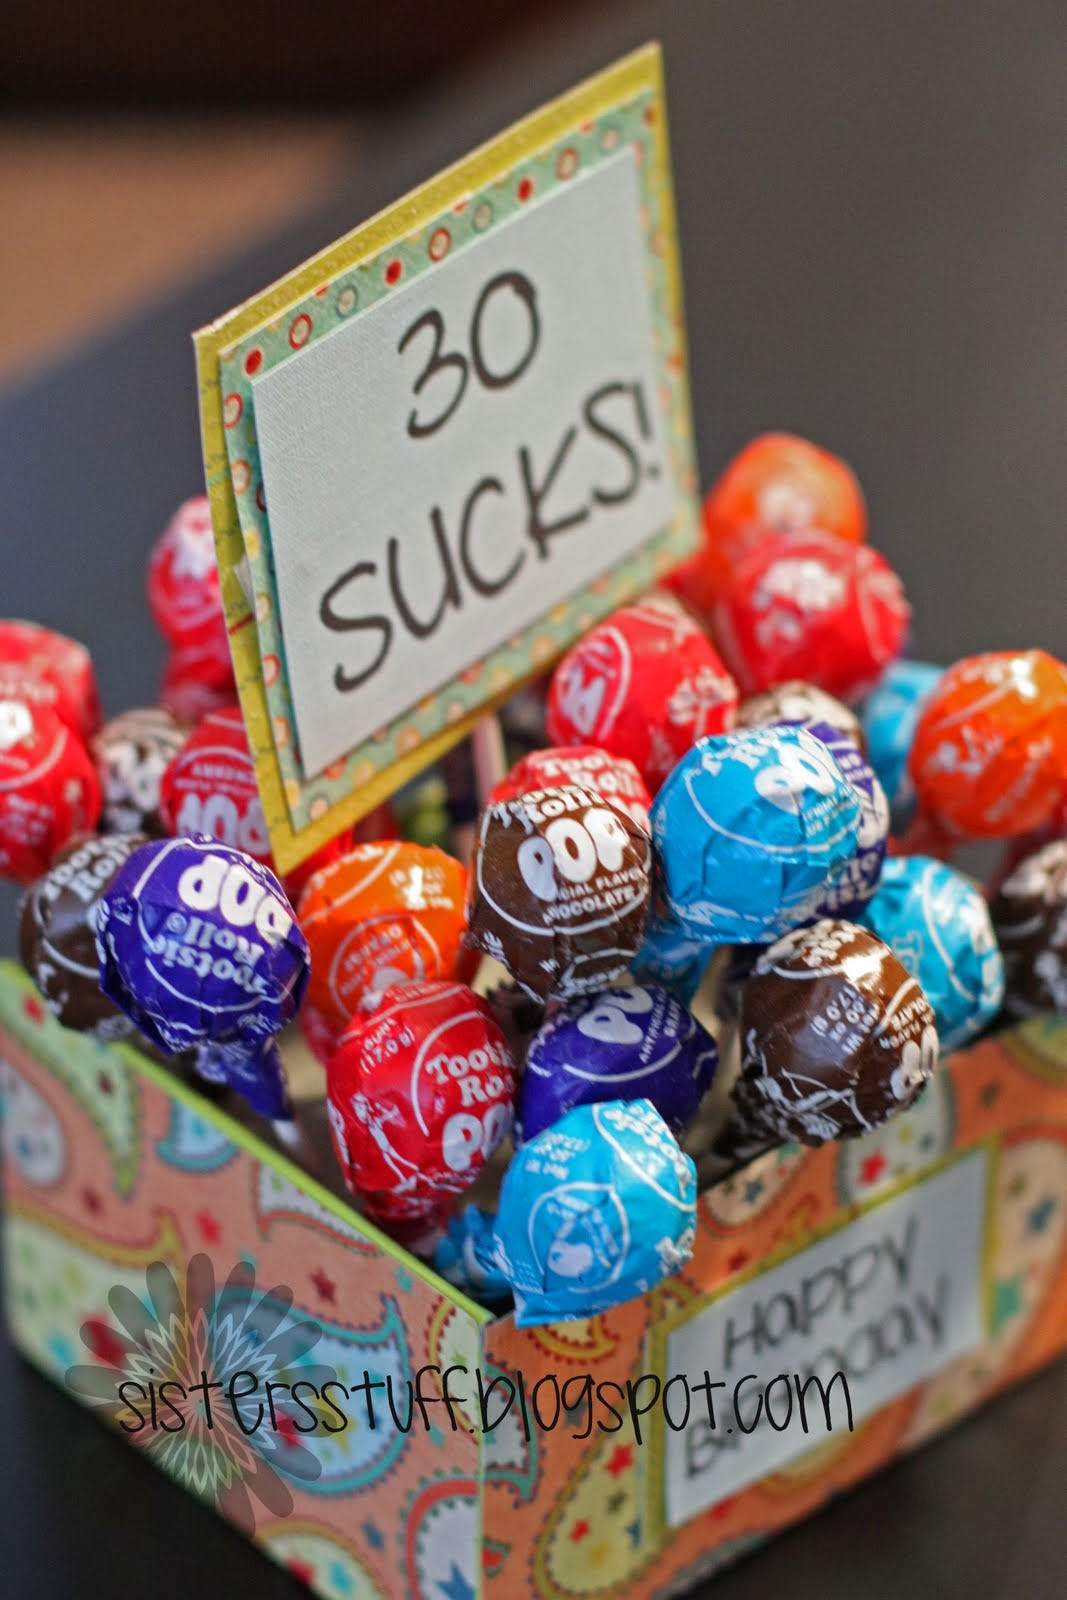 30 Years Old Birthday Gift Ideas
 Celebrate In Style With These 50 DIY 30th Birthday Ideas